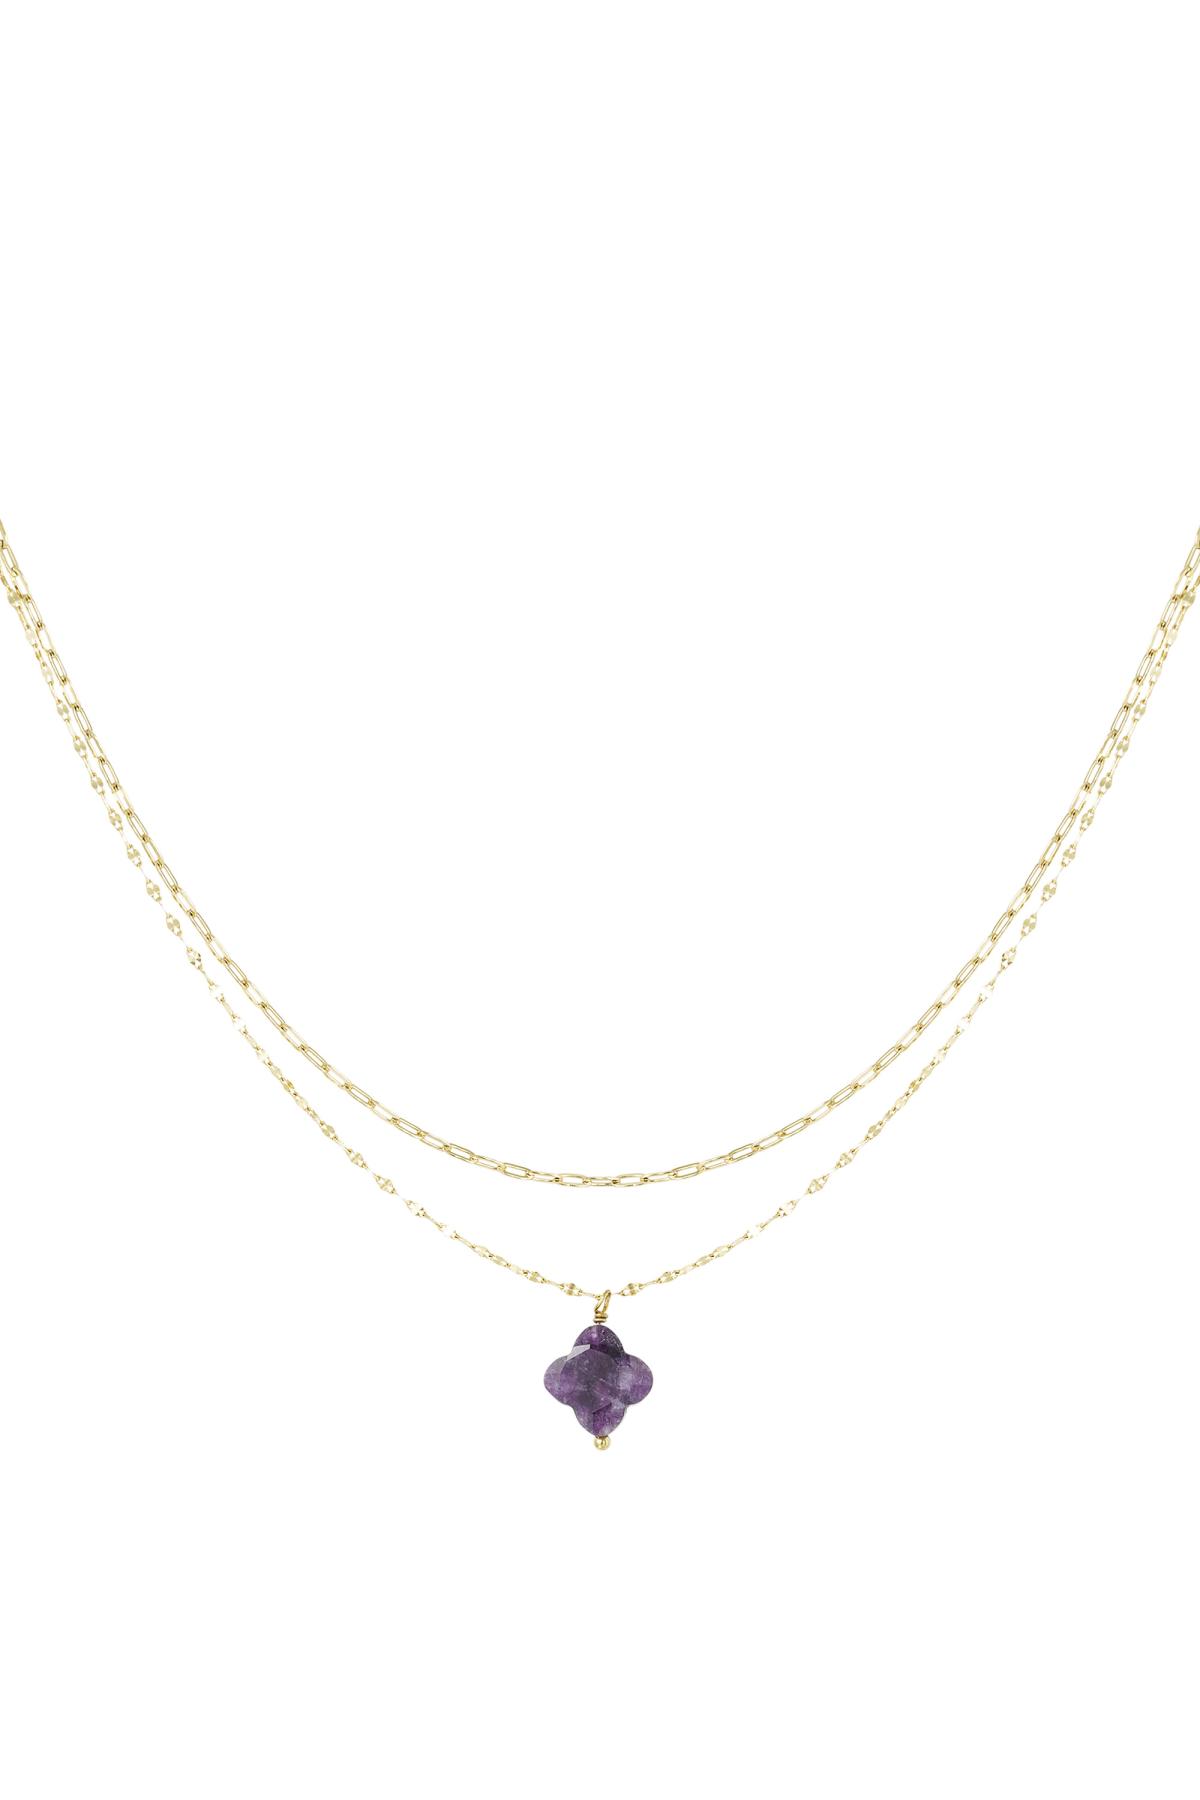 Double necklace with clover pendant - Natural stones collection Purple Stainless Steel h5 